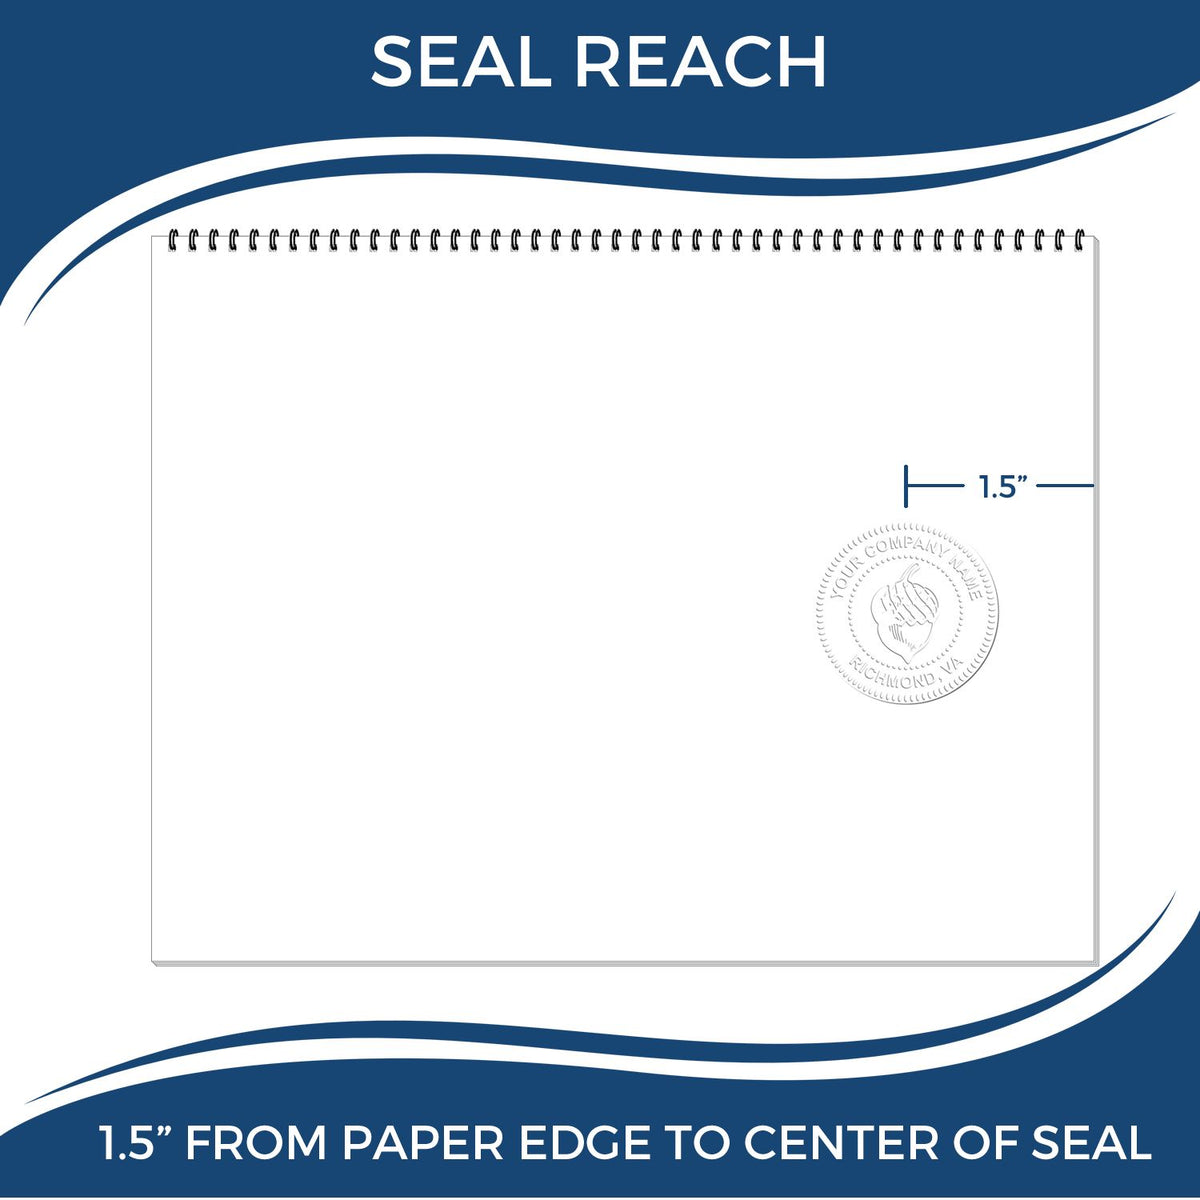 An infographic showing the seal reach which is represented by a ruler and a miniature seal image of the Handheld Iowa Professional Geologist Embosser